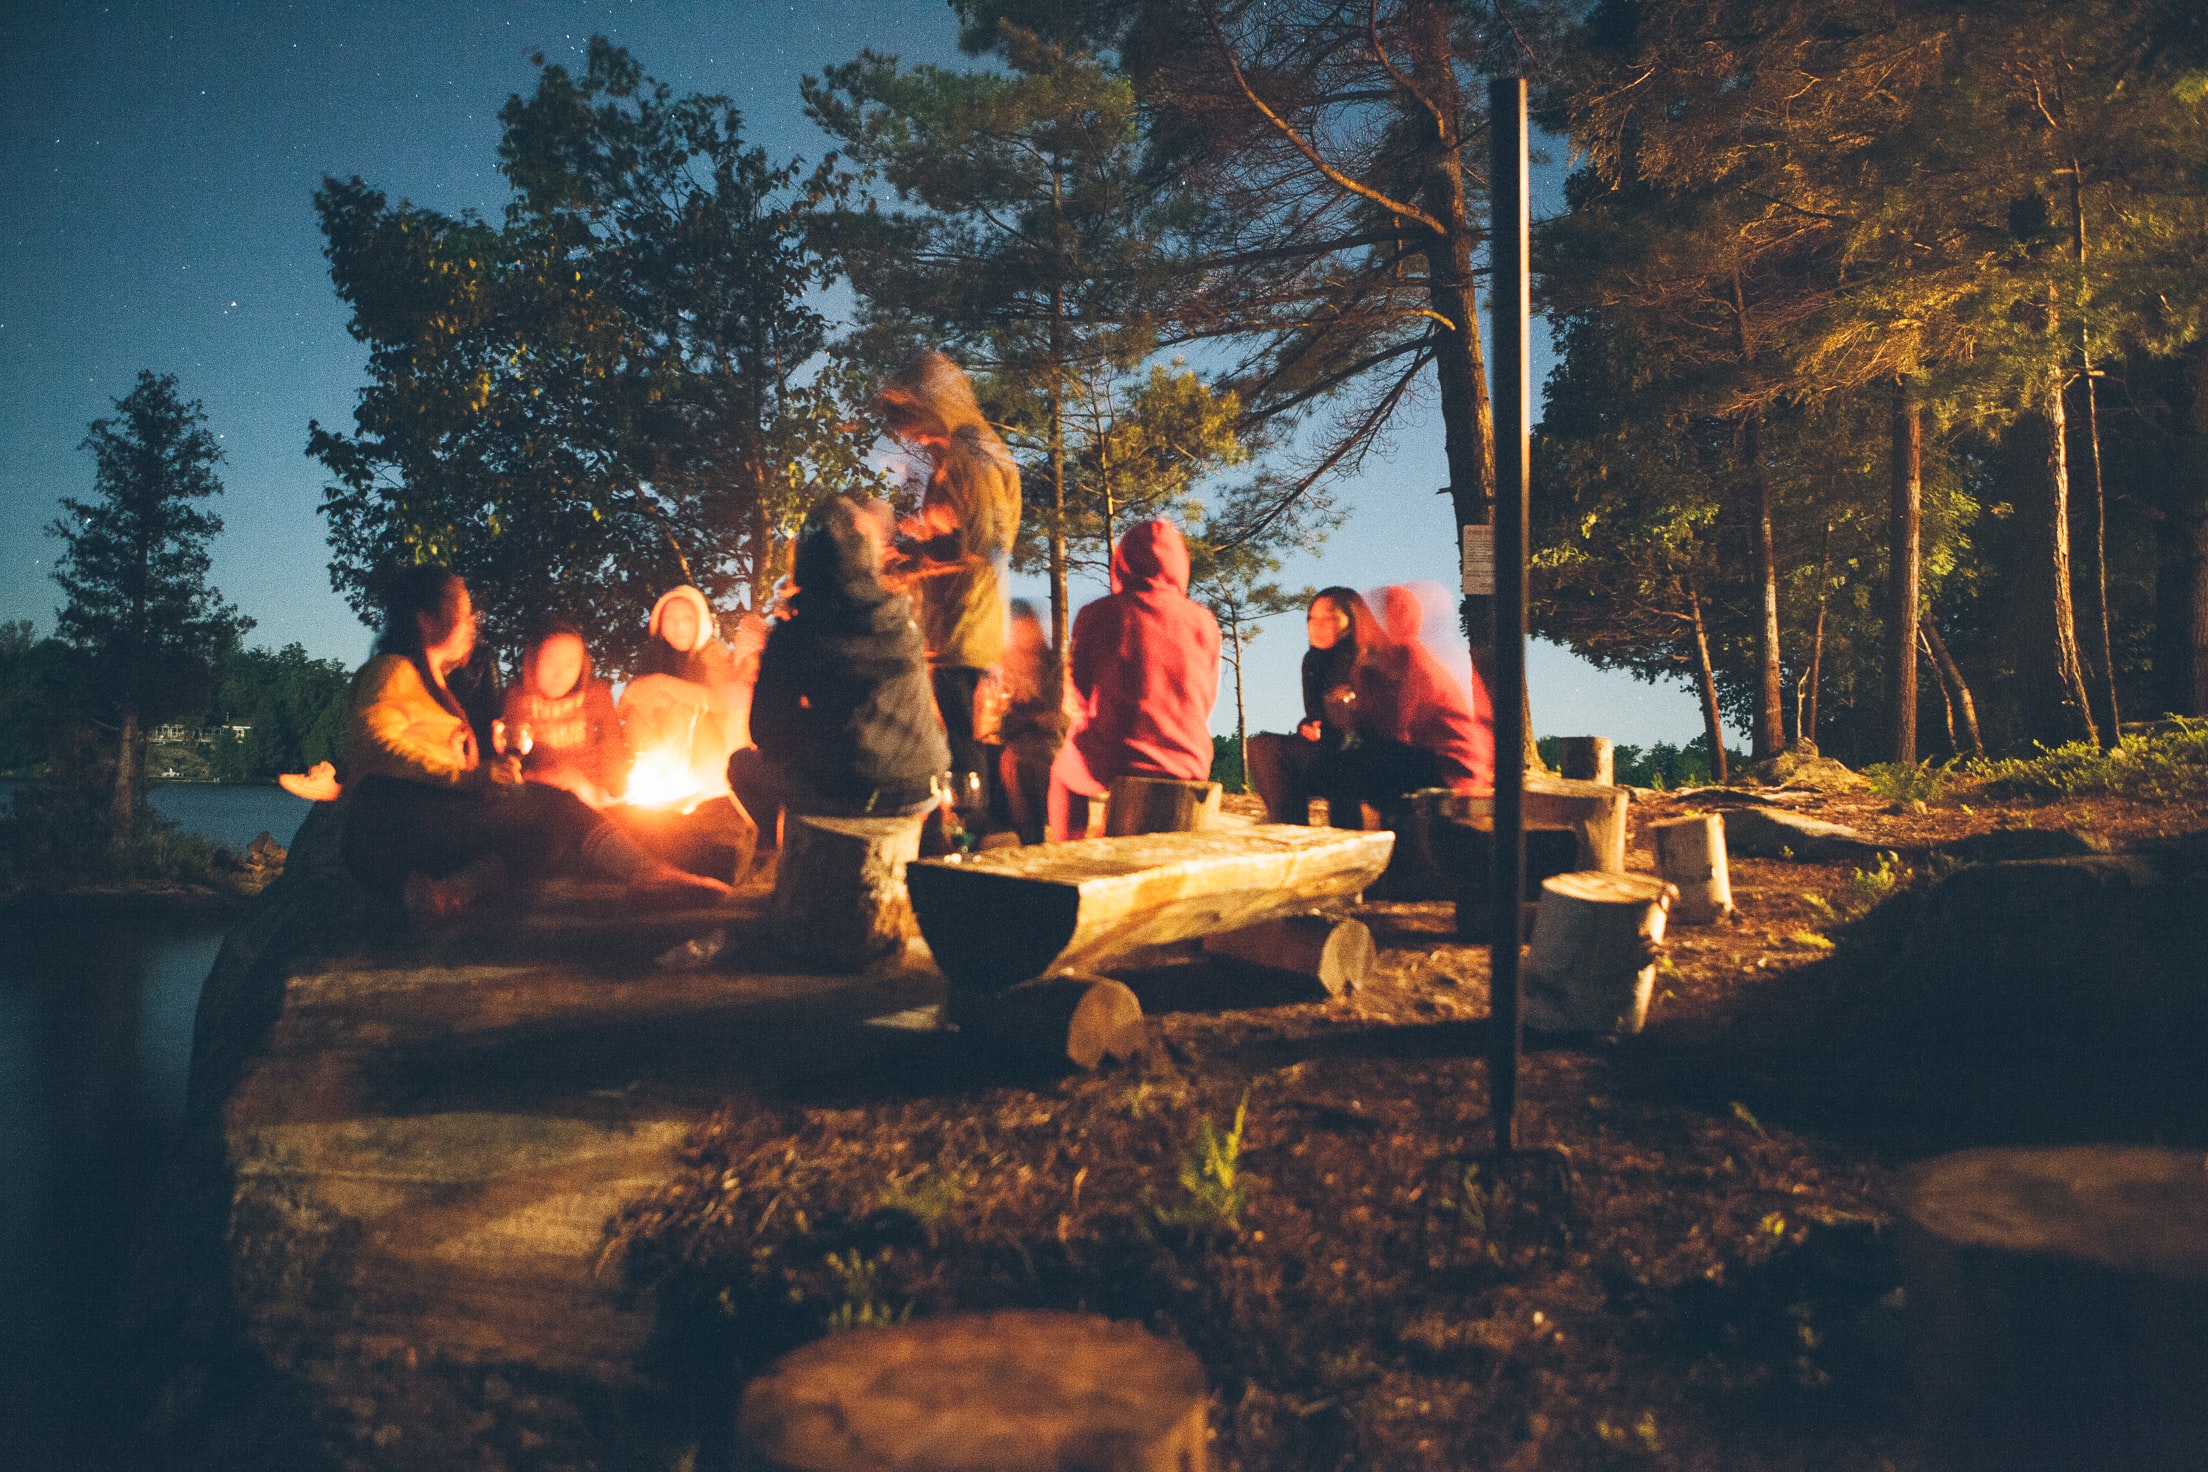 A group surrounding a campfire with one person standing and speaking to the group.